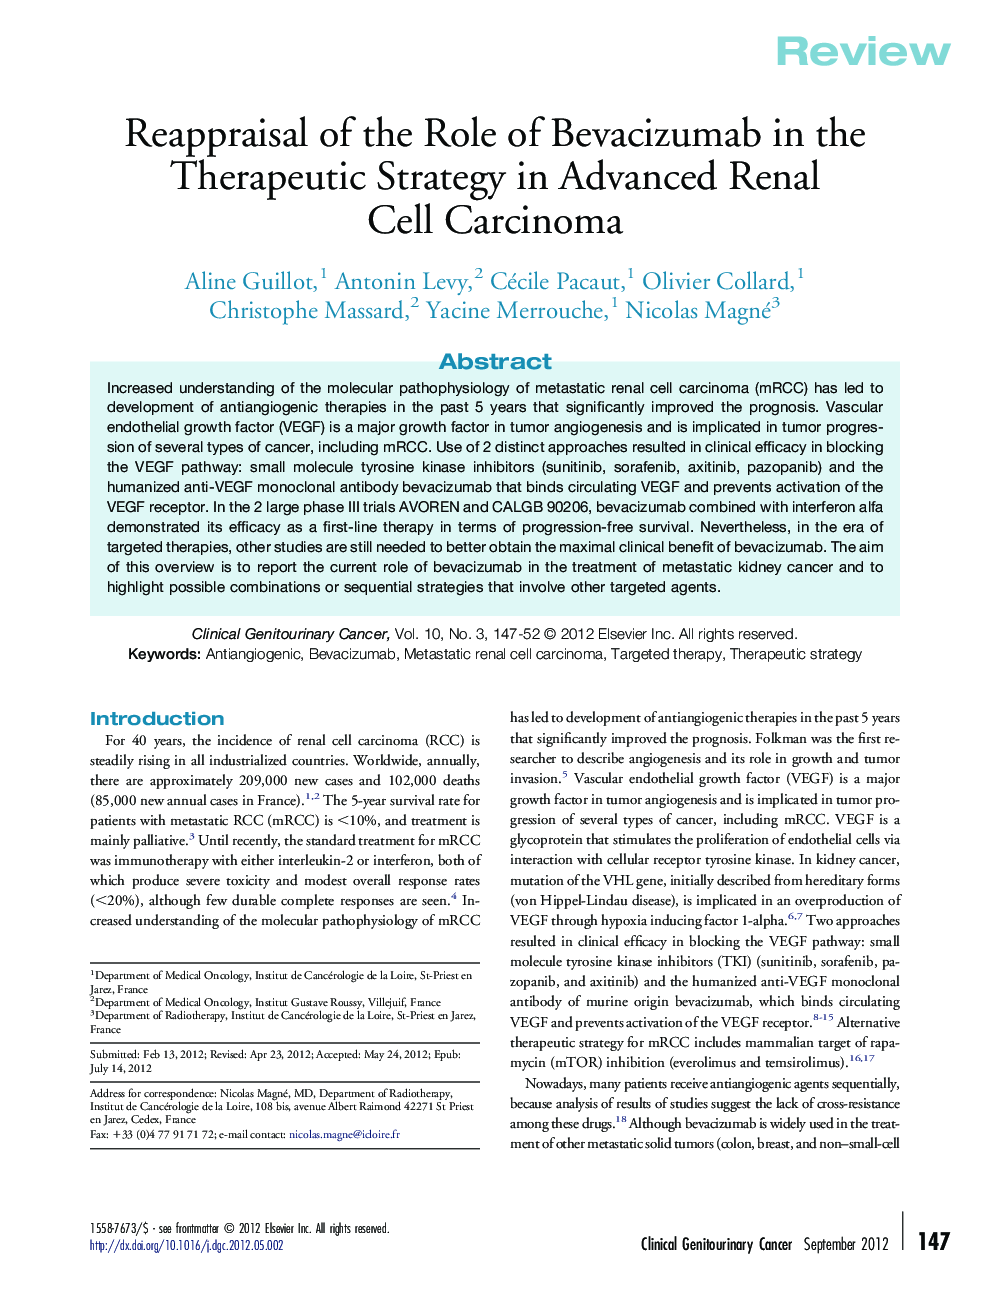 Reappraisal of the Role of Bevacizumab in the Therapeutic Strategy in Advanced Renal Cell Carcinoma